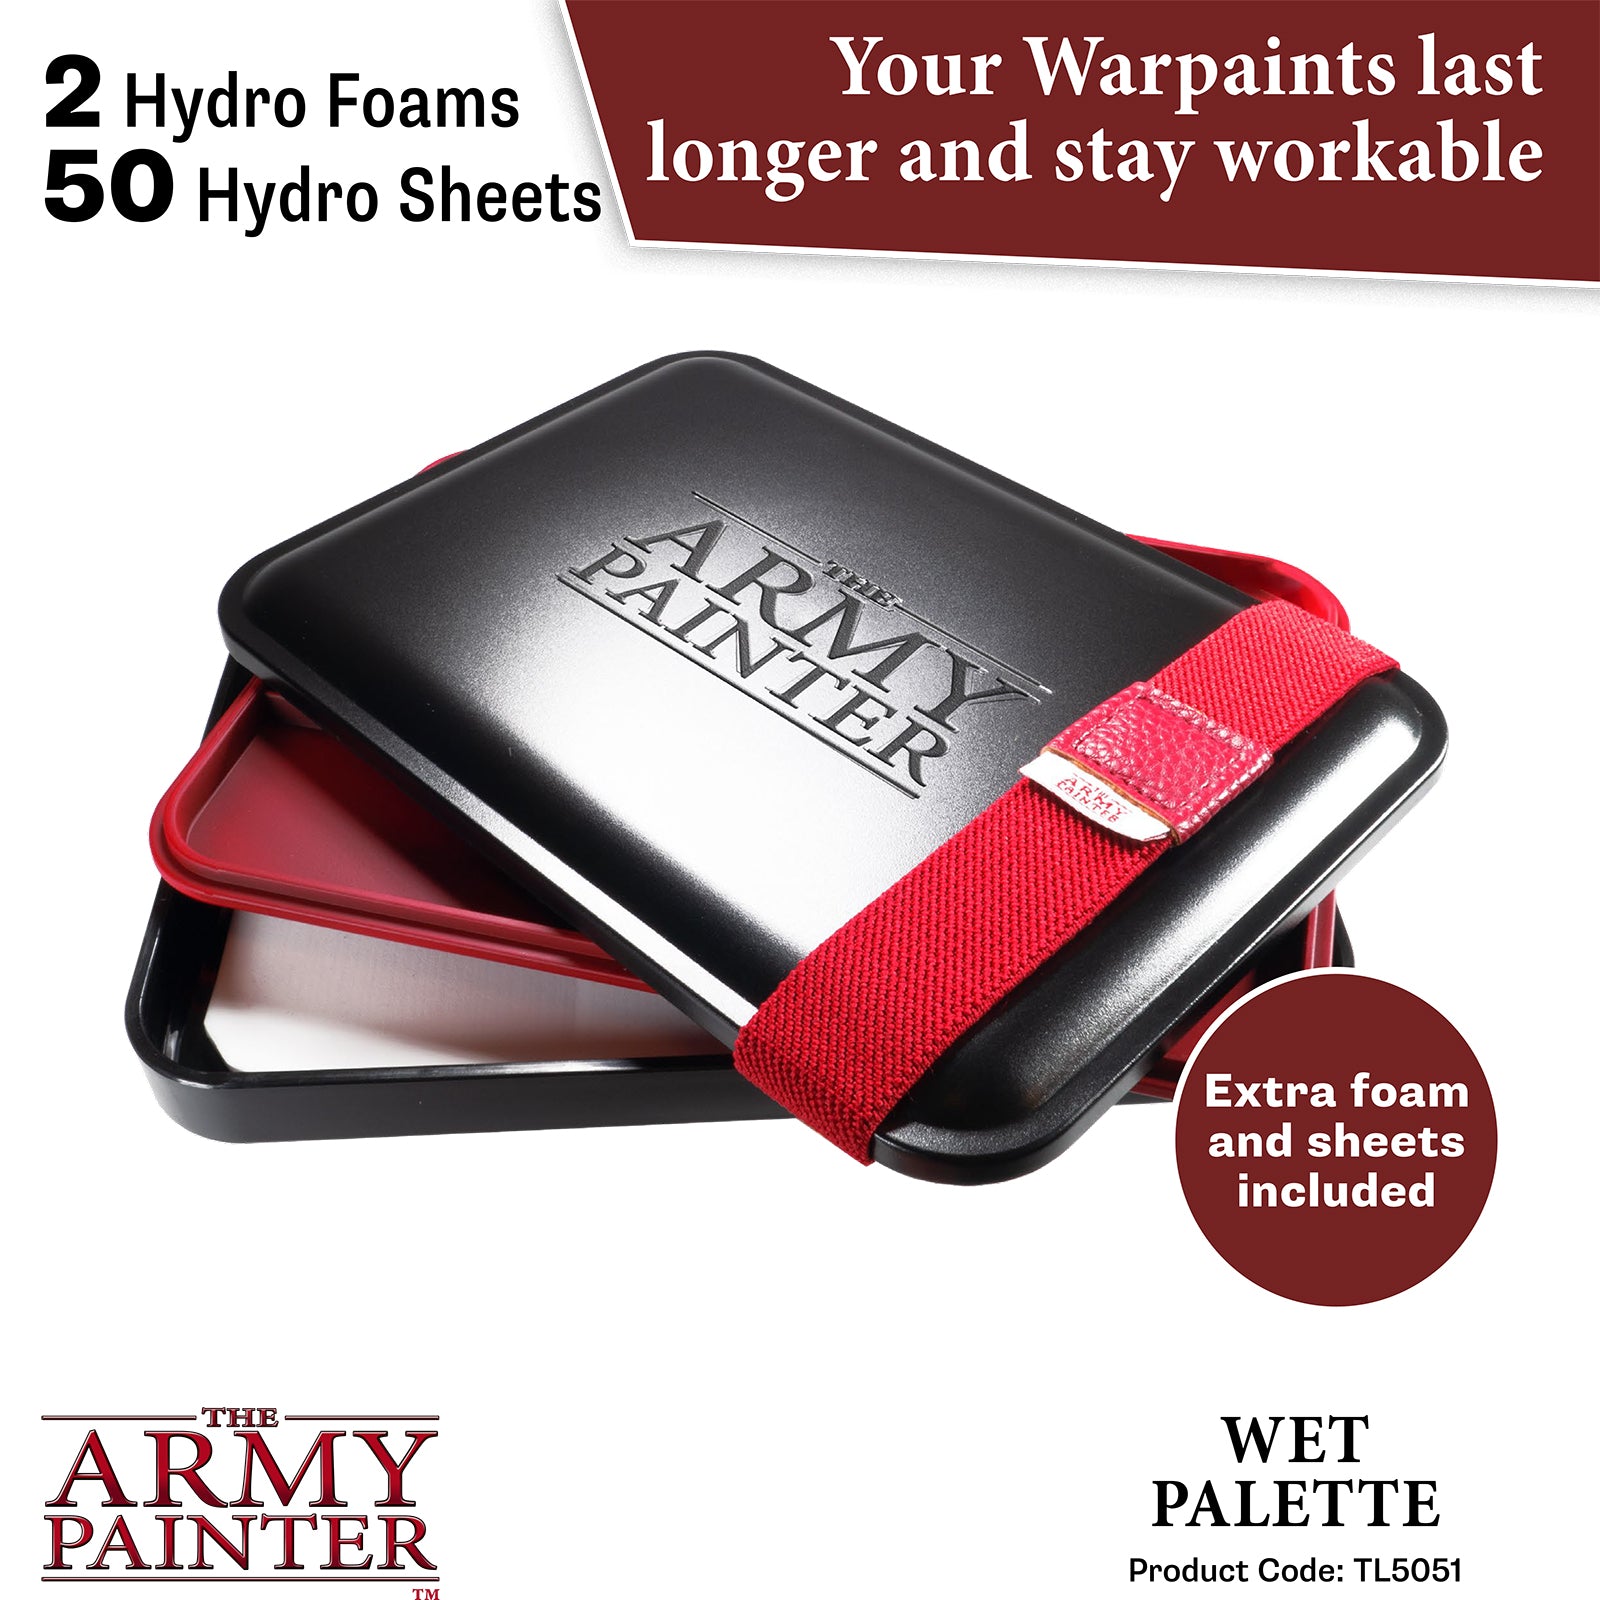 Army Painter Wet Palette Hydro Pack